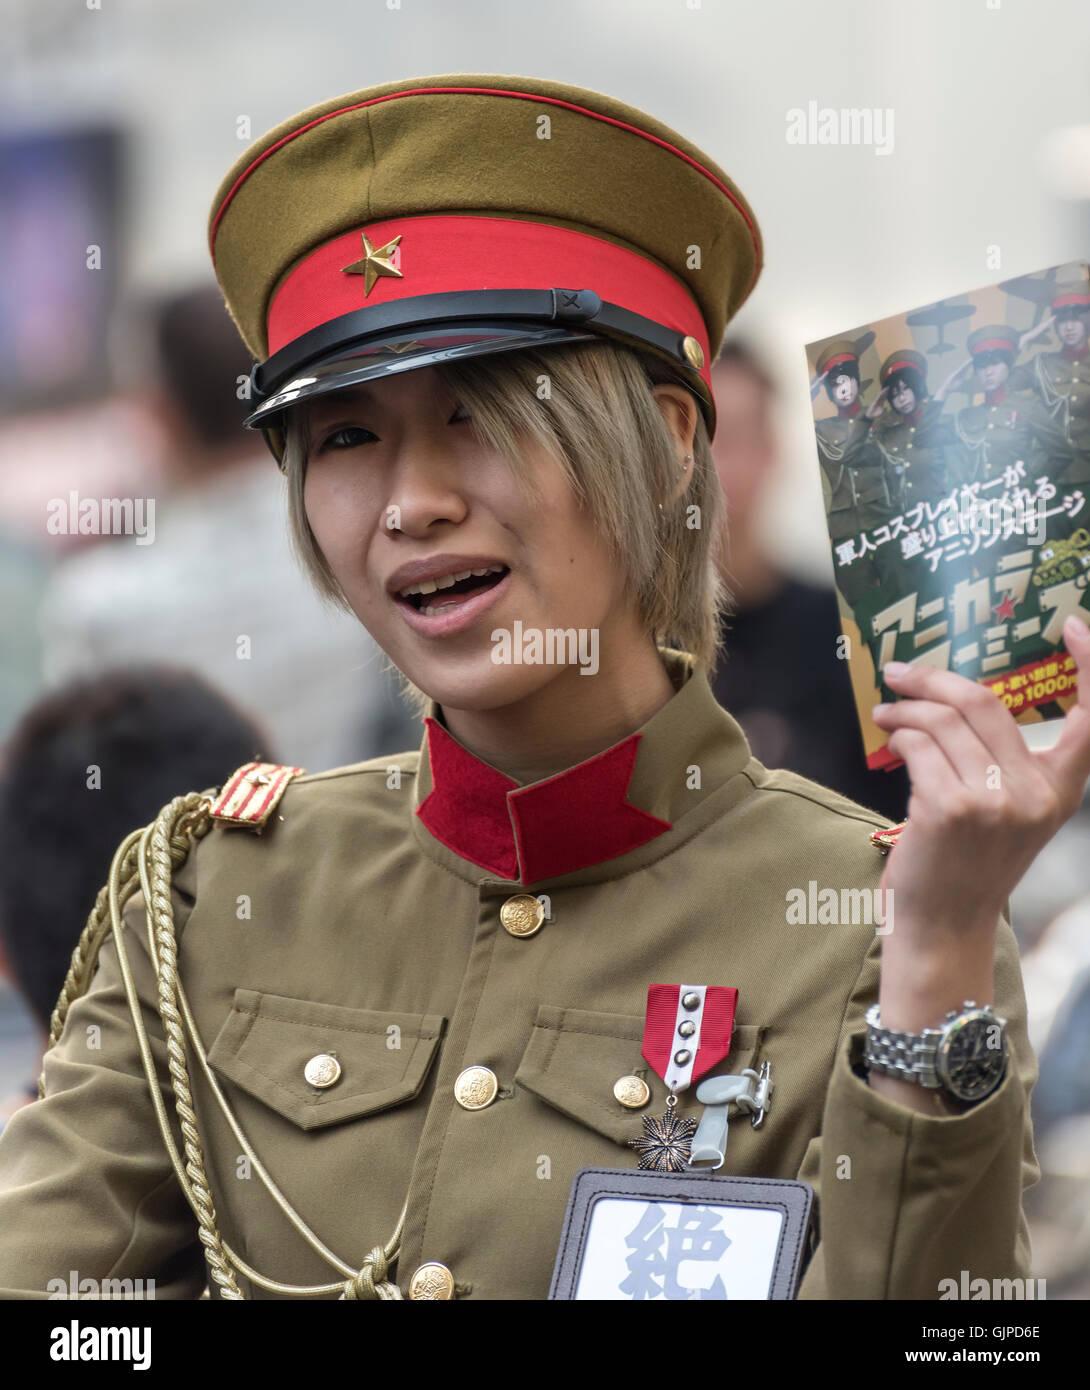 young-woman-in-imperial-japanese-army-service-uniform-handing-out-GJPD6E.jpg